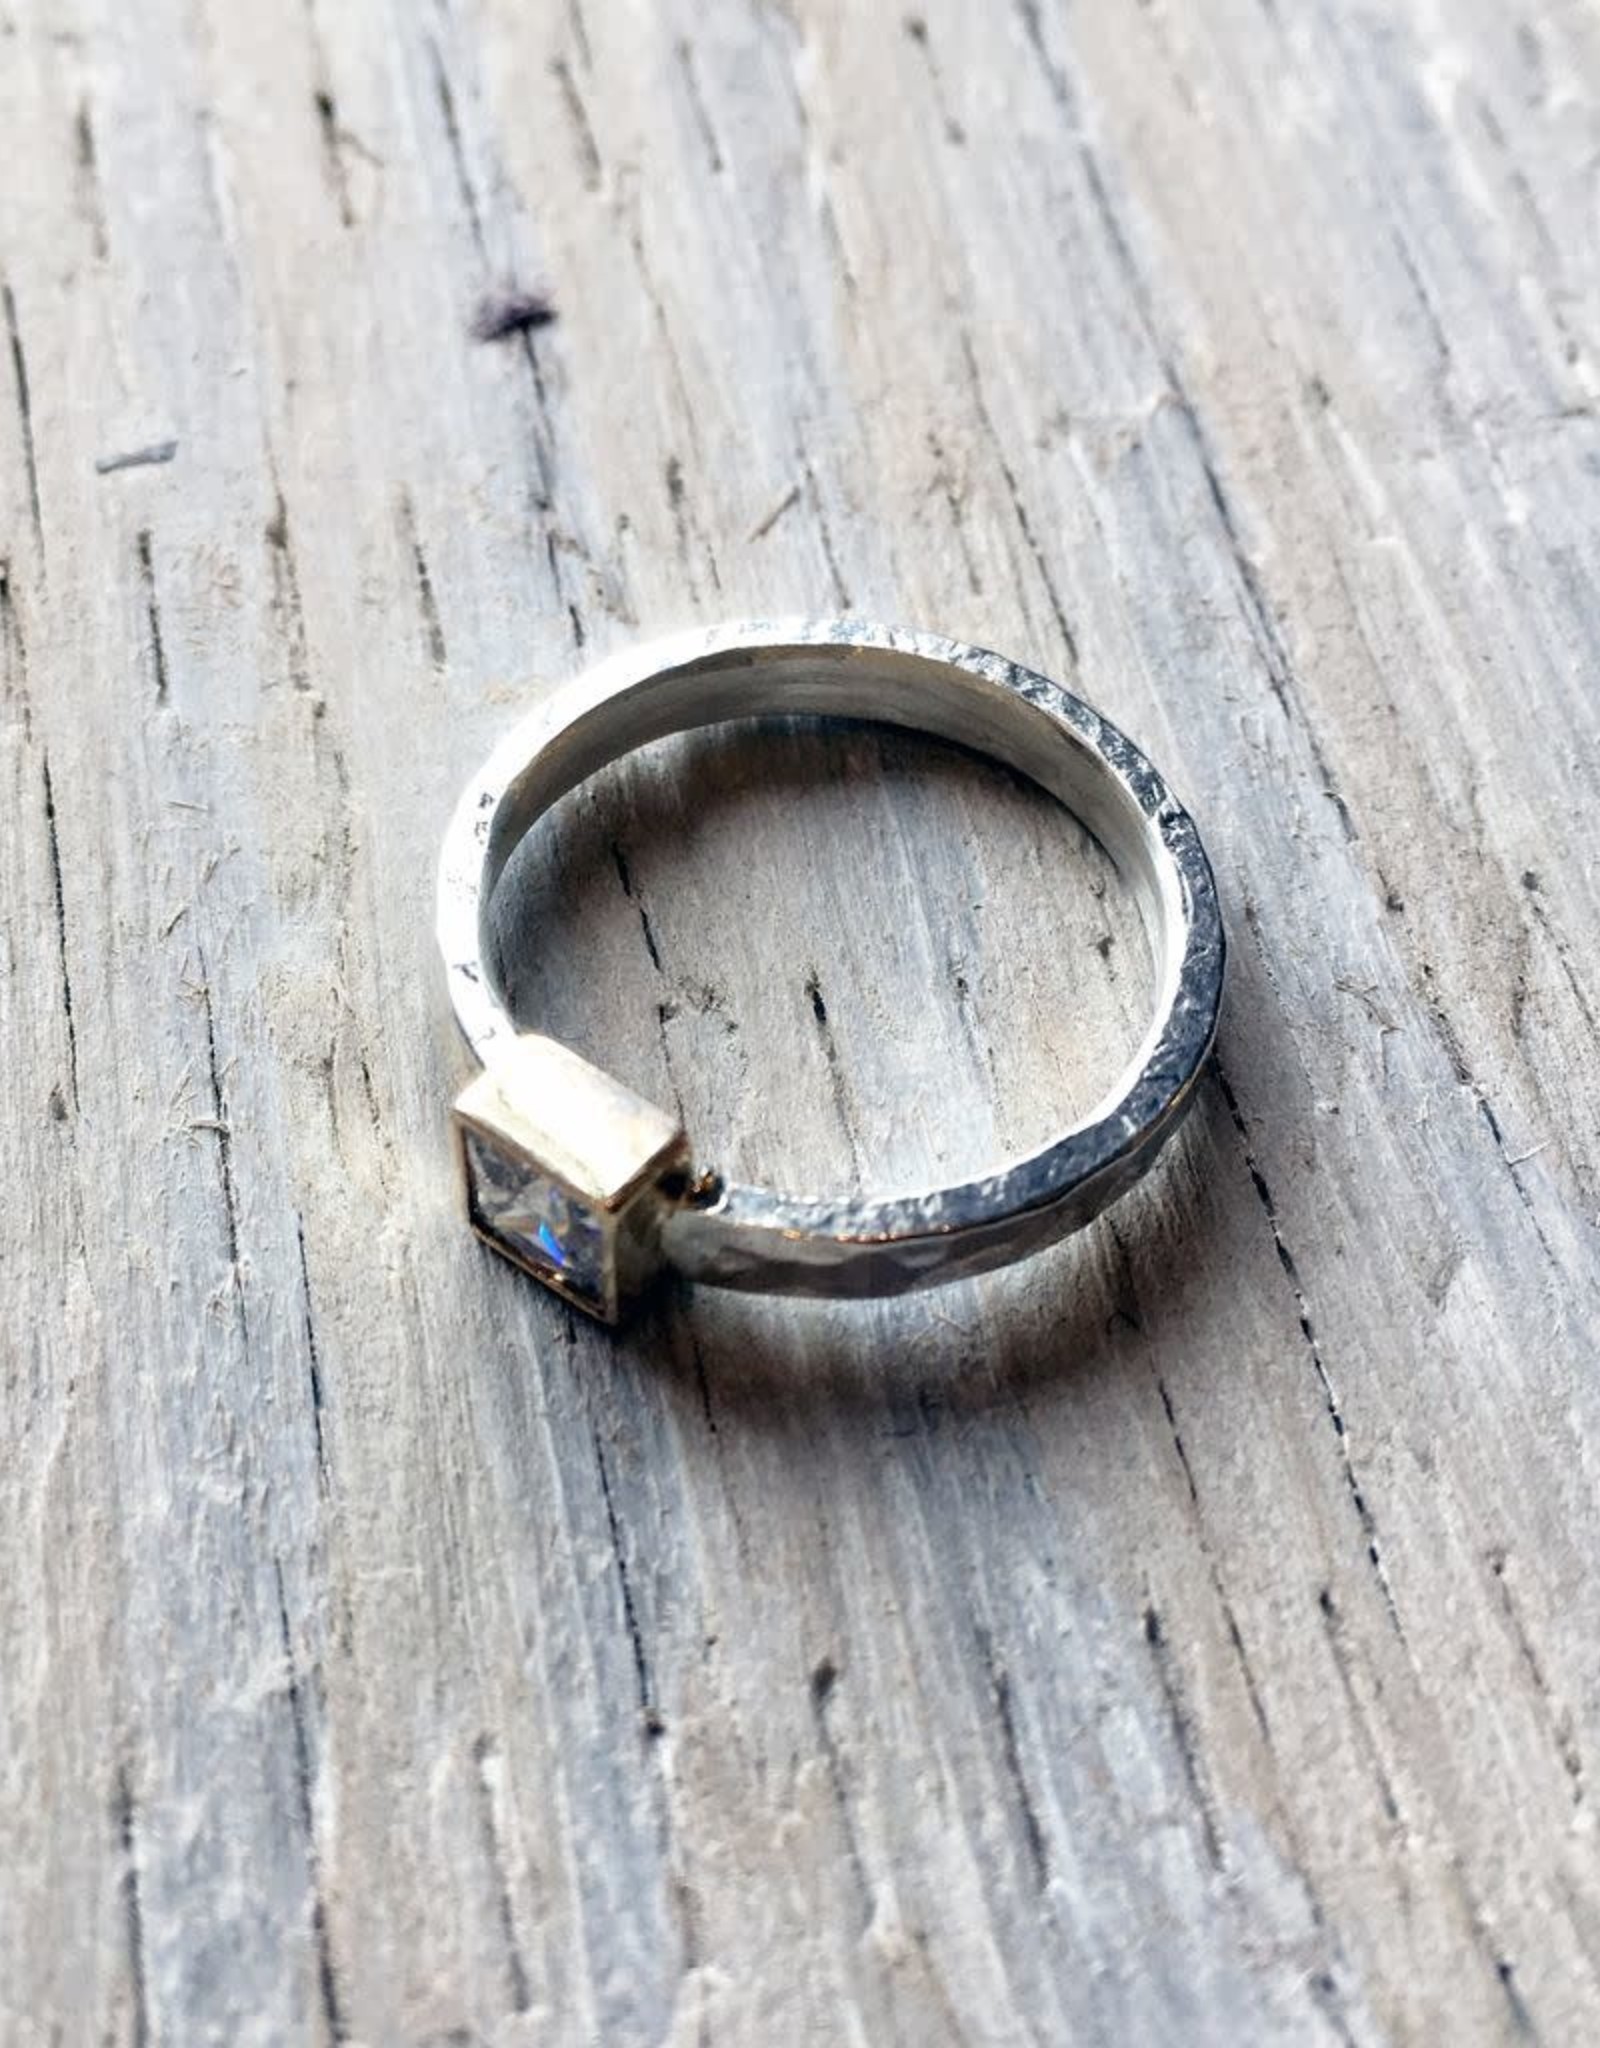 Chris Gillrie Northern Star Ring. Square Cubic Zirconia in 14K Yellow Gold Setting. Solid Silver hammered band. Size 6.5